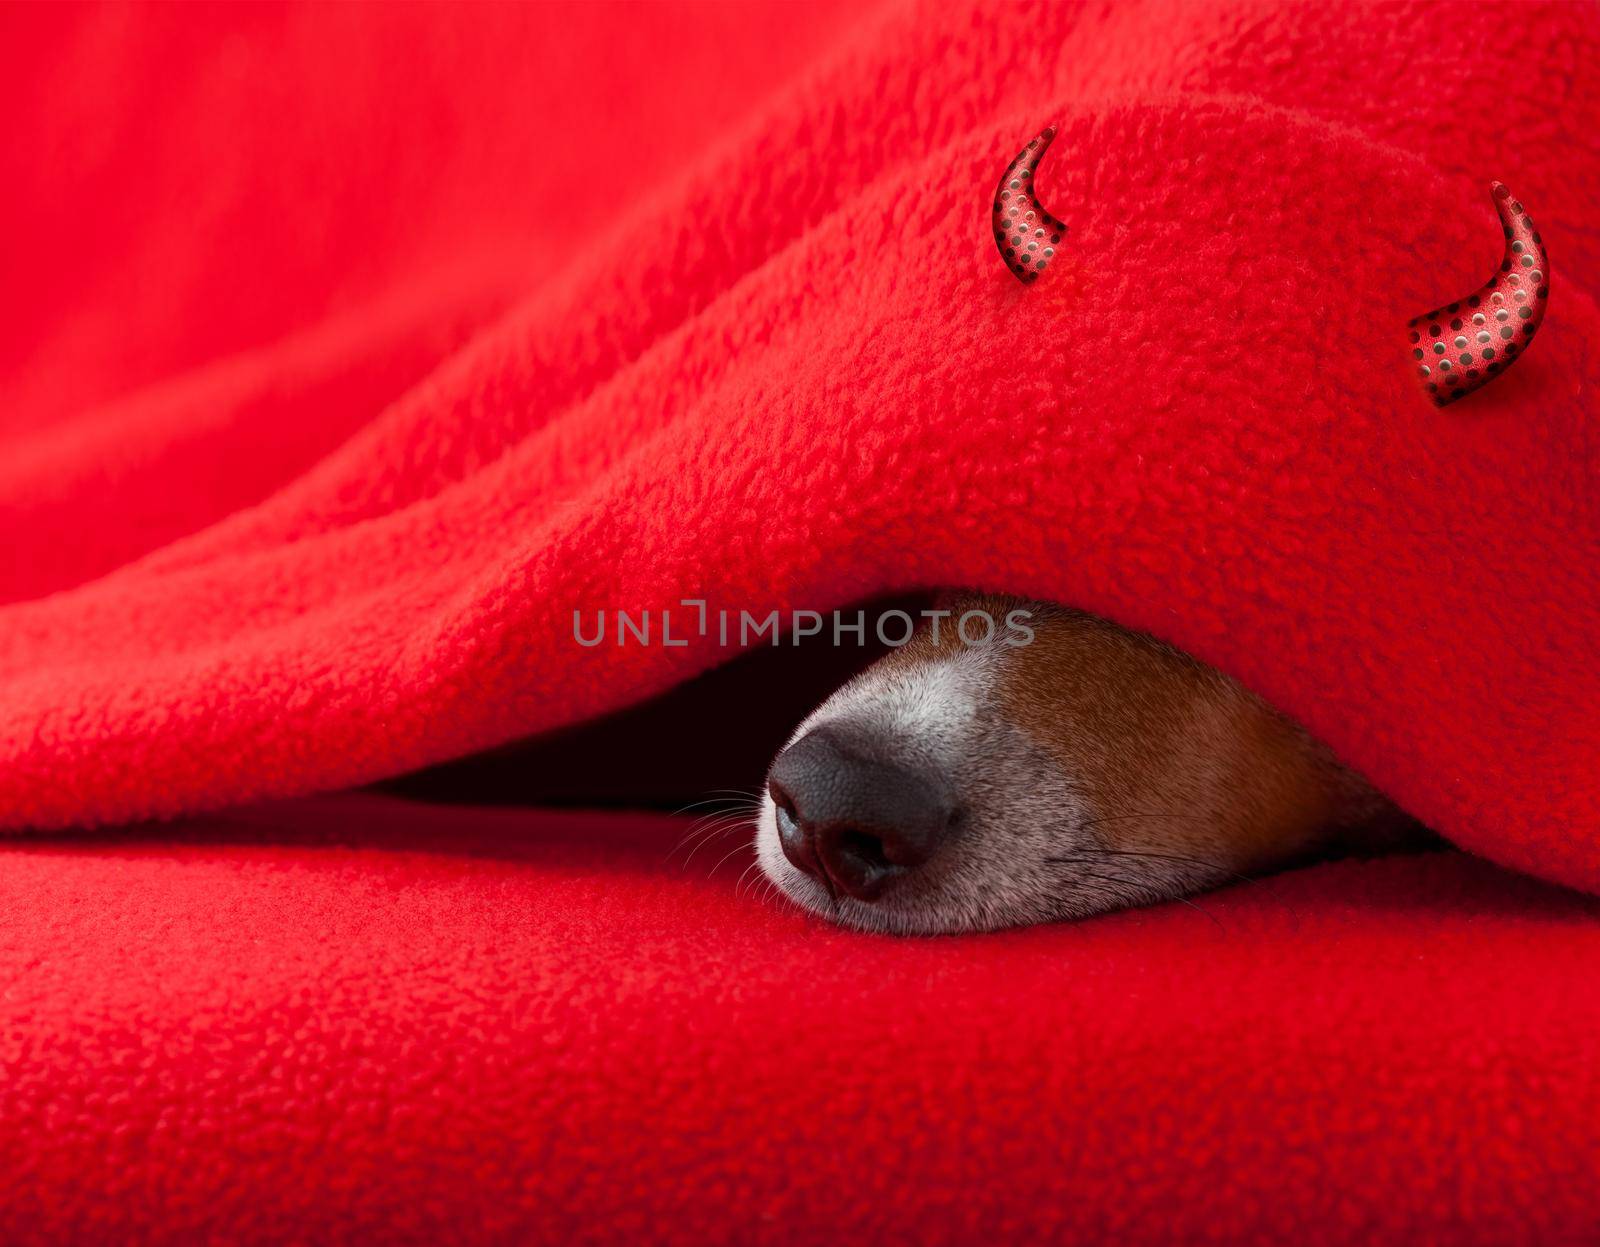 jack russell devil dog  with halloween horns  sleeping under the blanket in bed the  bedroom, ill ,sick or tired,  red sheet covering its face